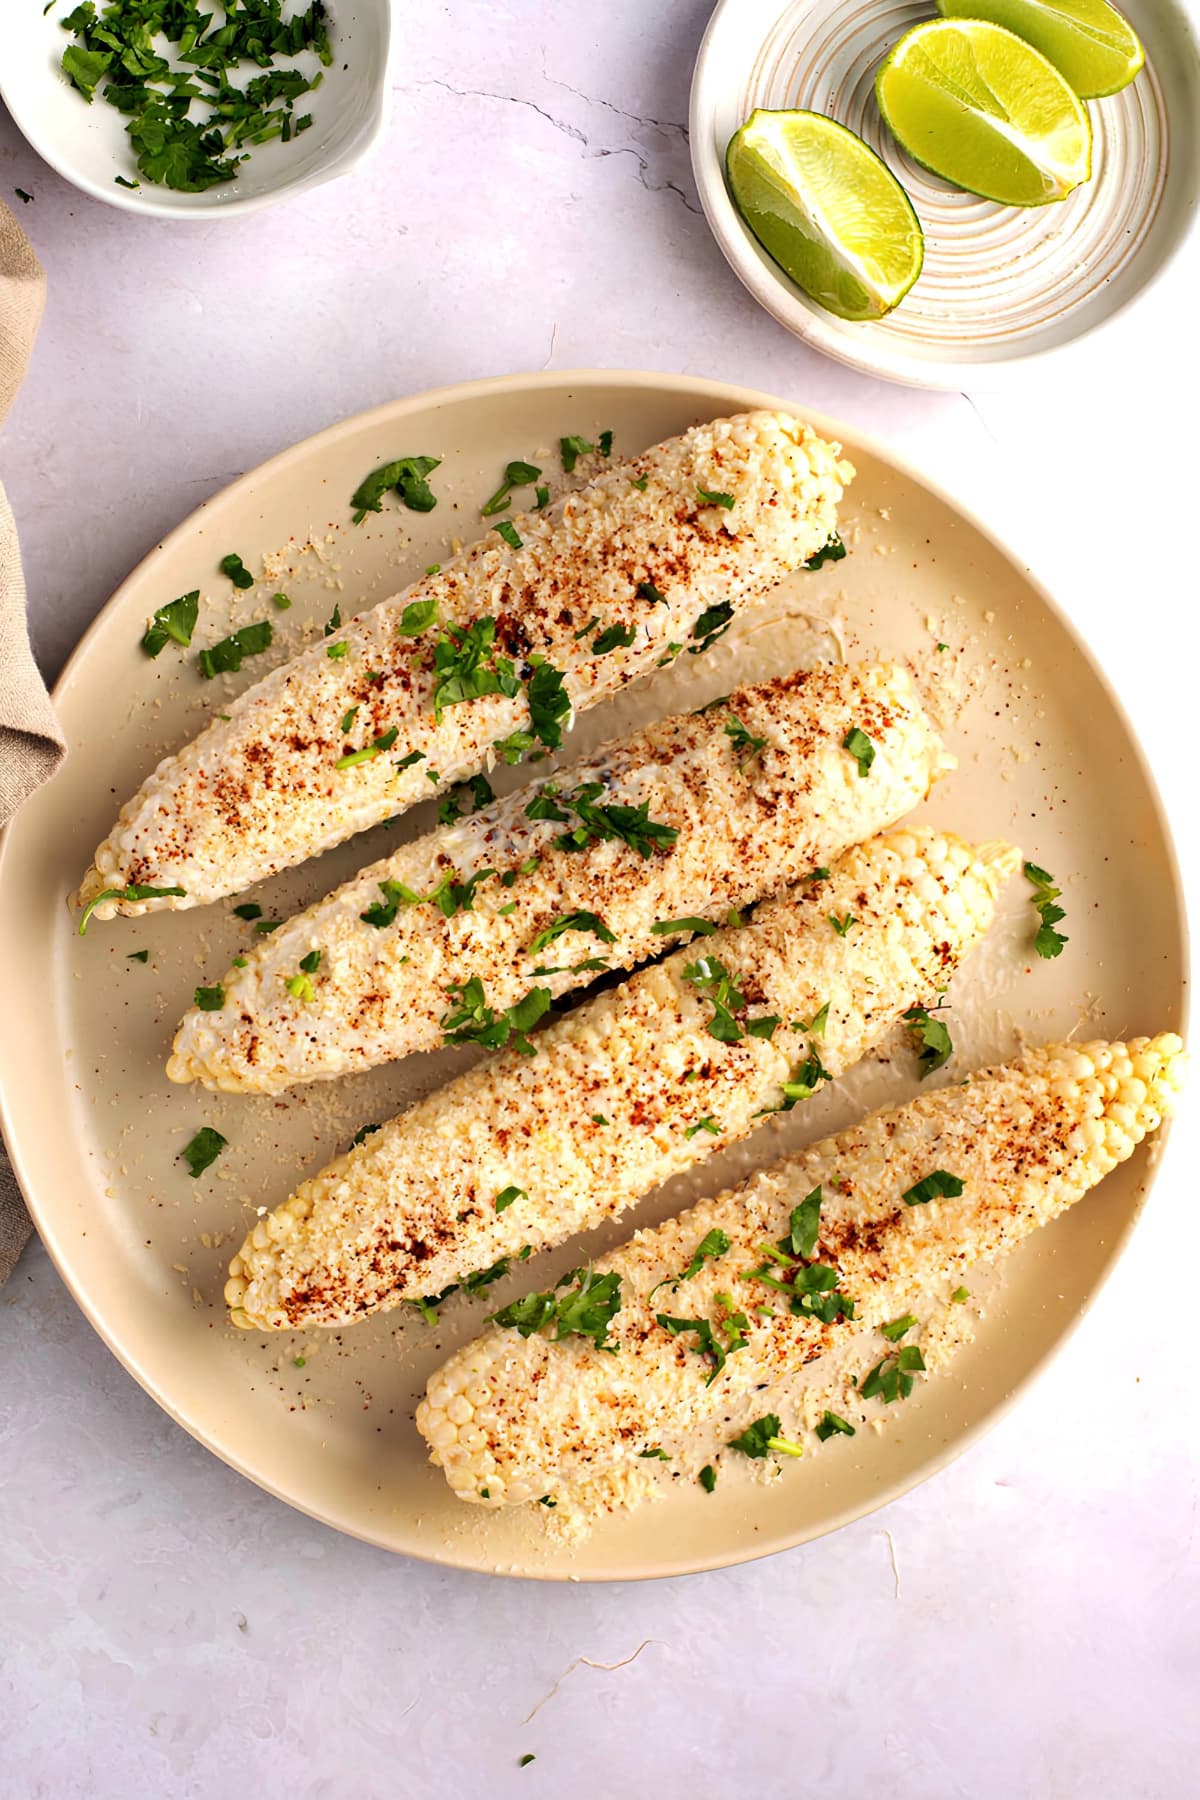 Homemade Mexican Street Corn with Spices, Cilantro and Lime